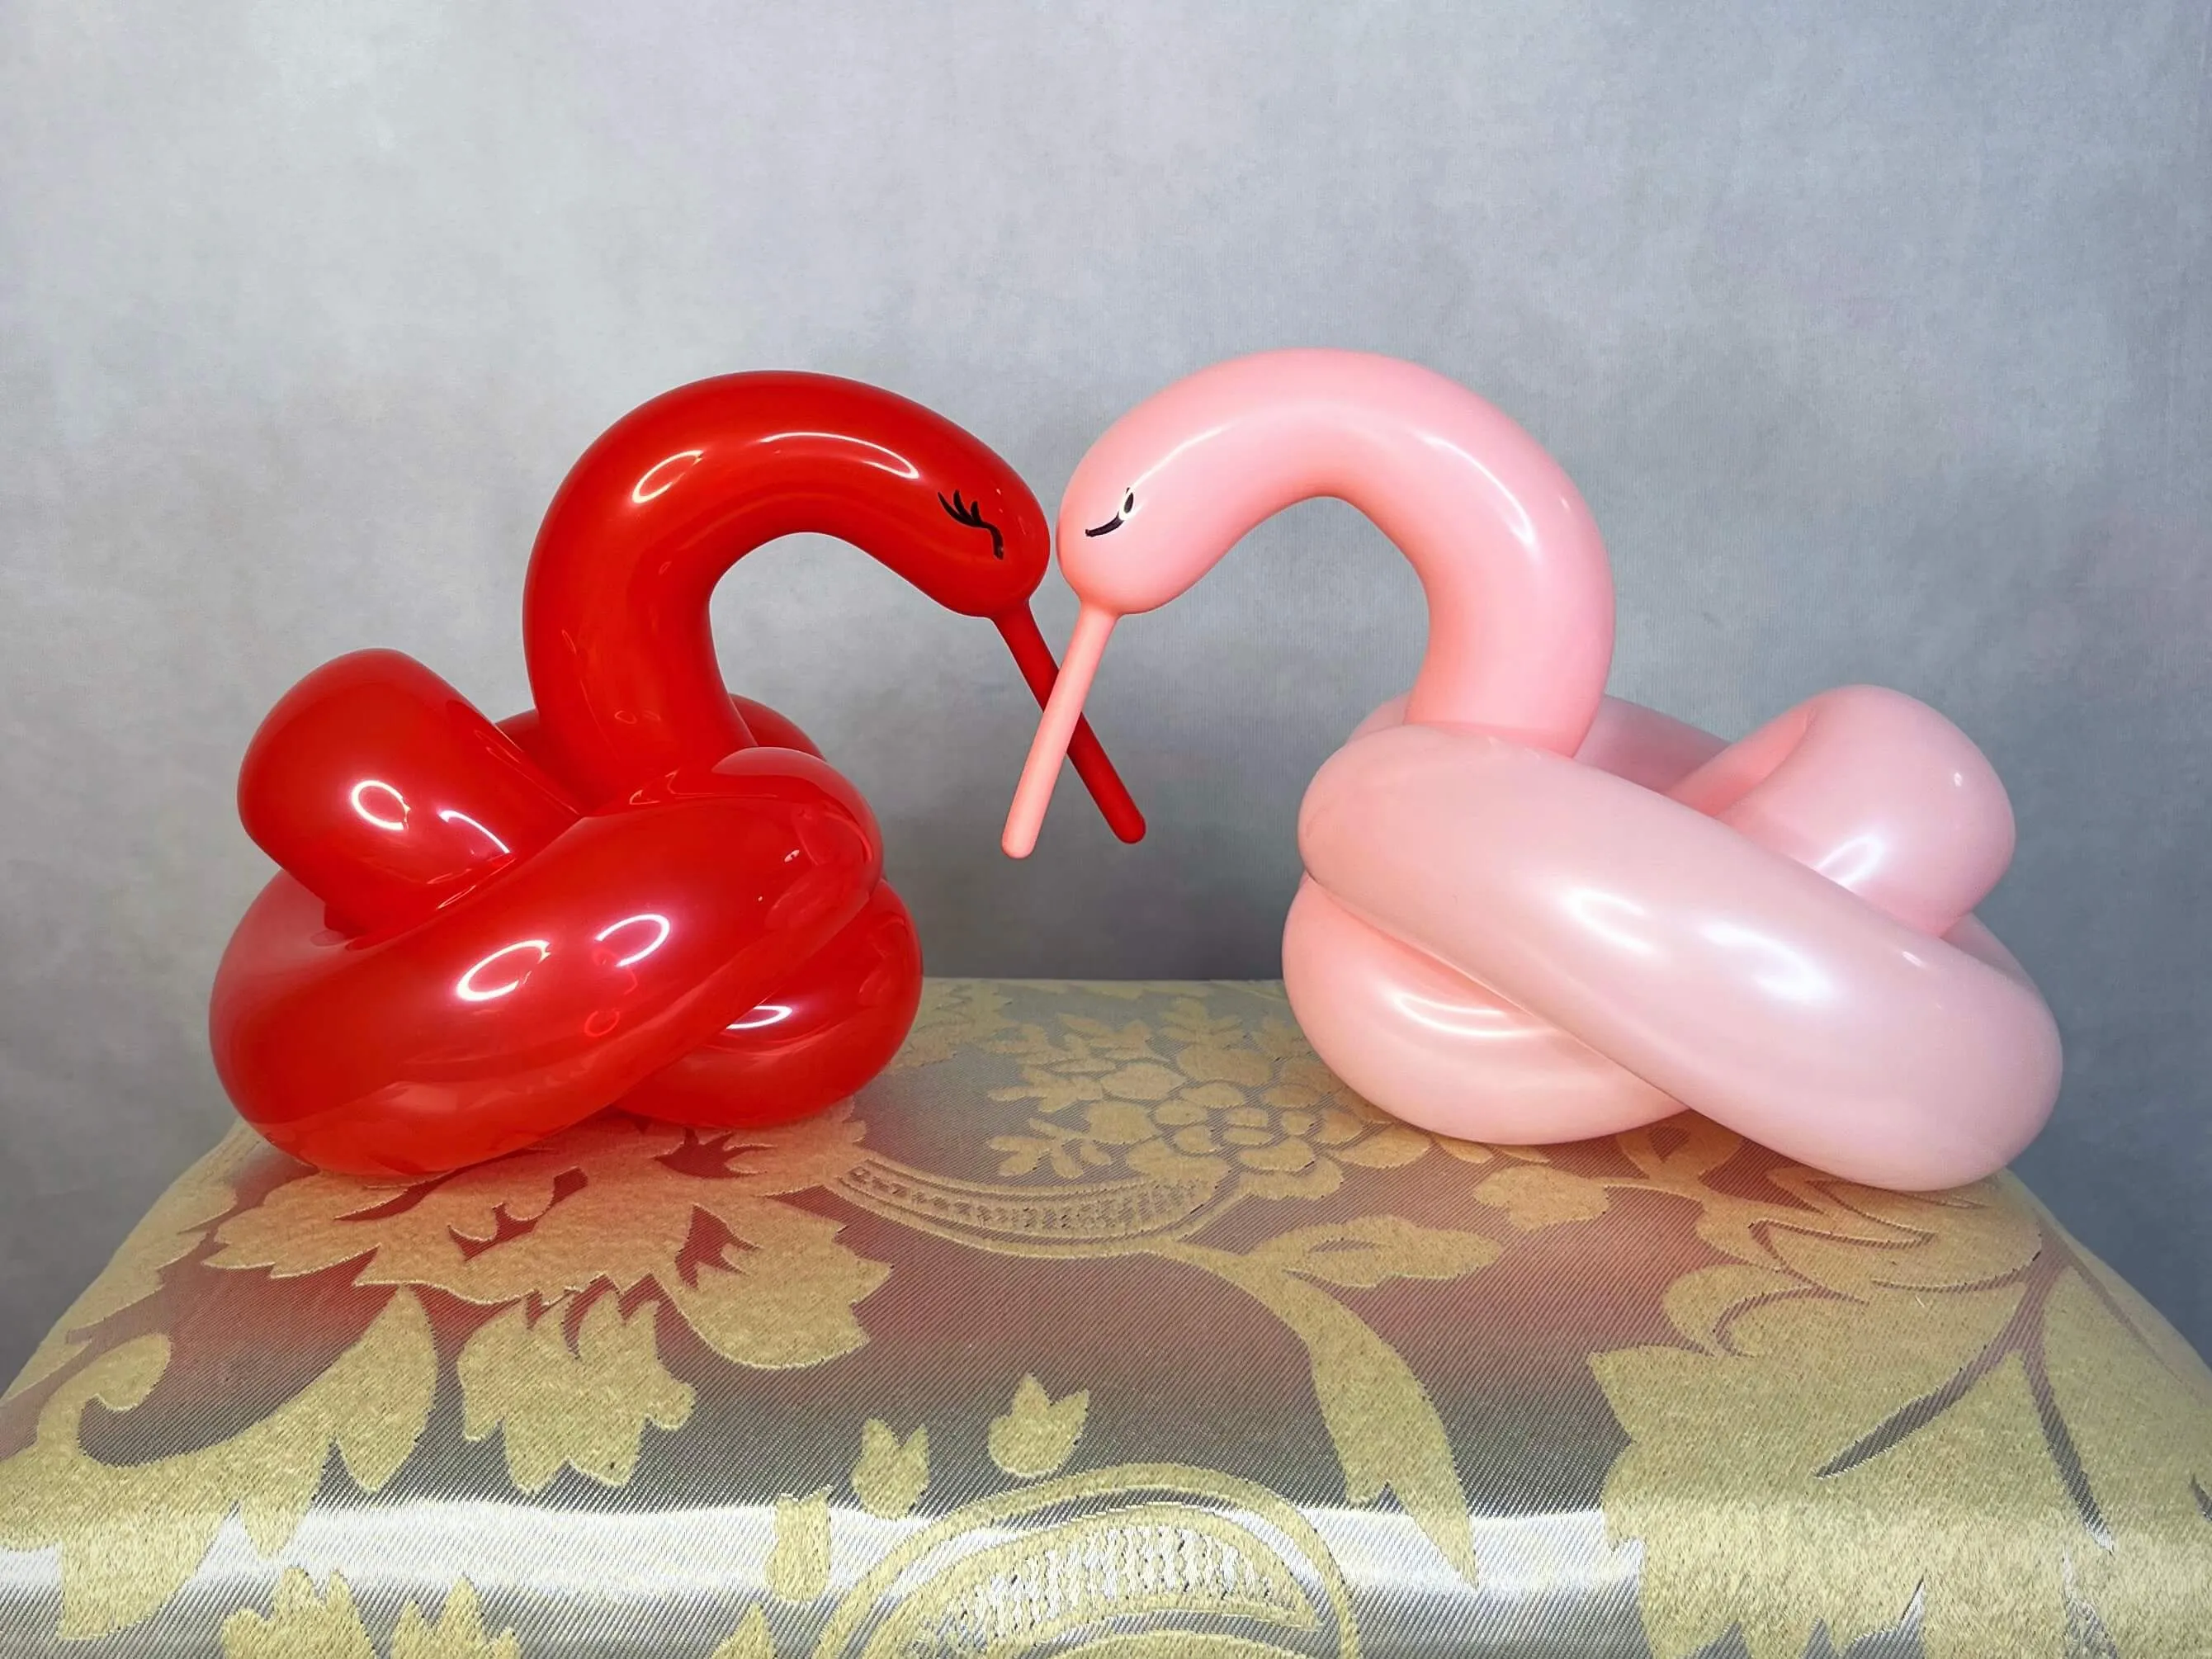 Balloon sculpture of two swans